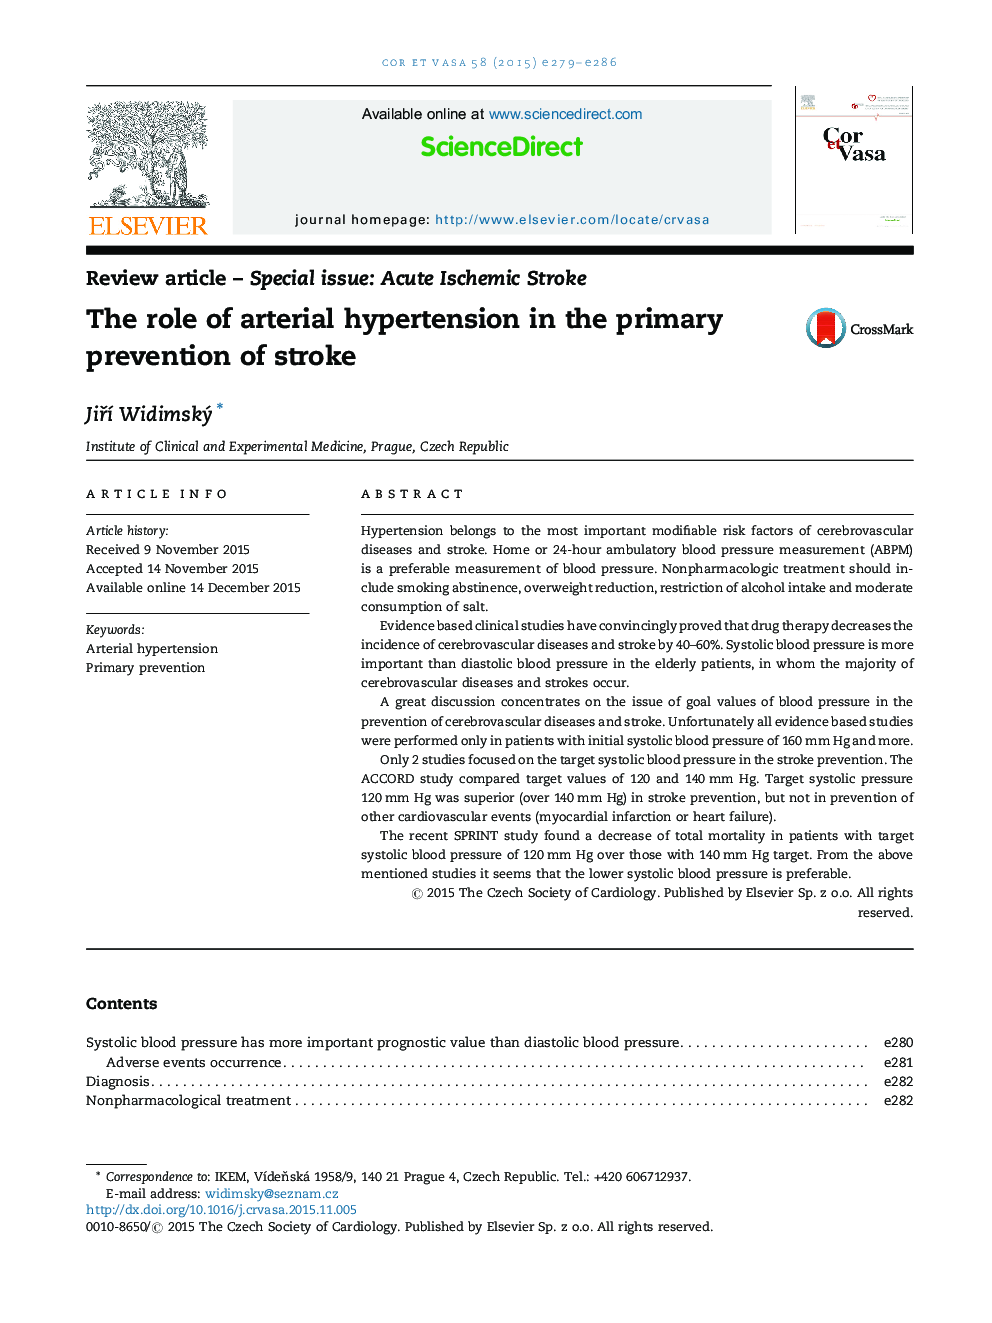 The role of arterial hypertension in the primary prevention of stroke